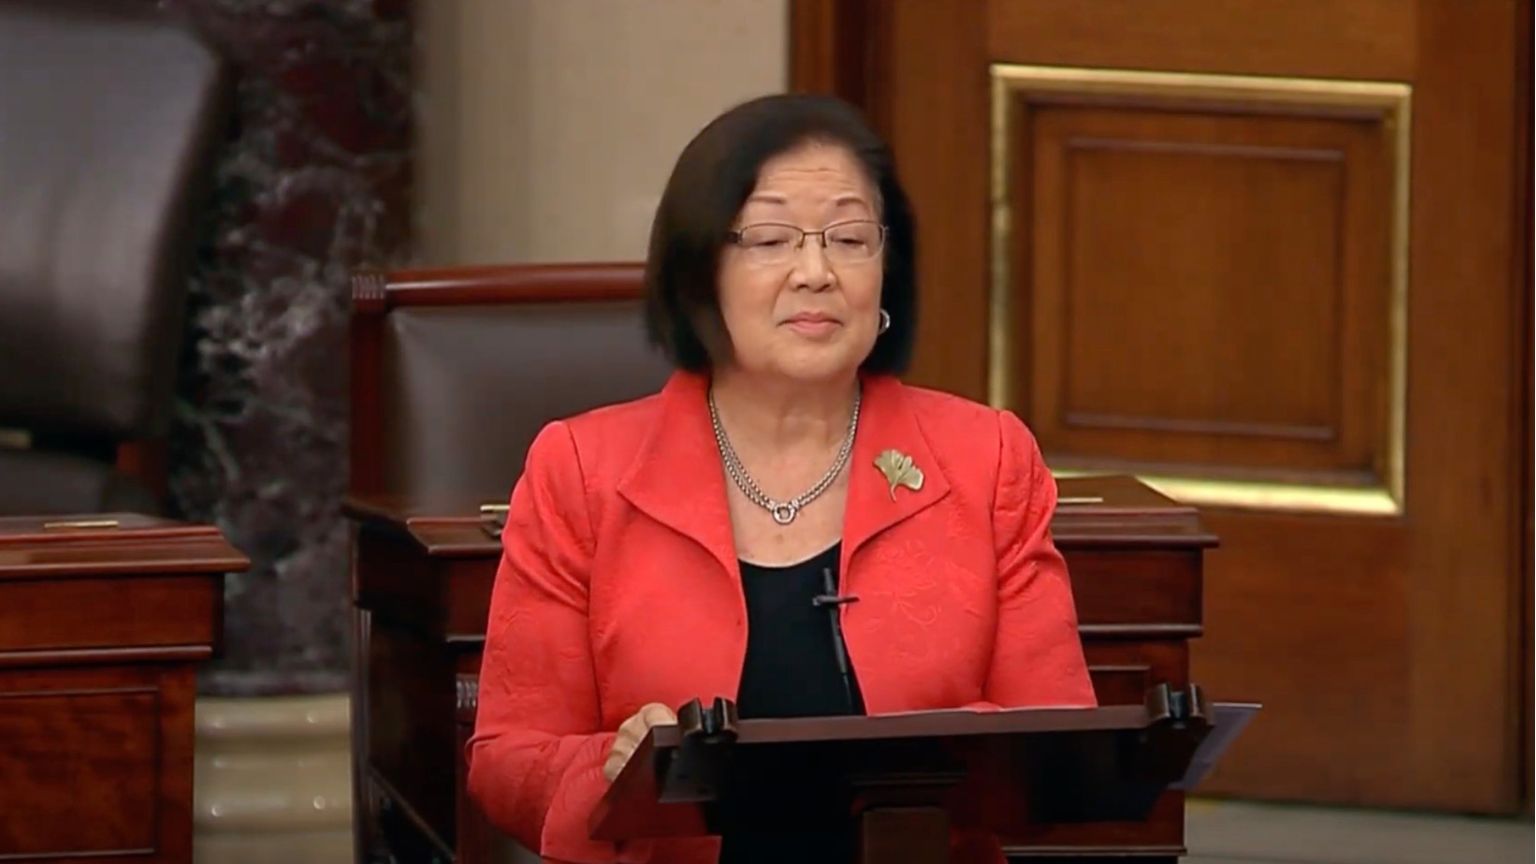 Senator Mazie Hirono Claims Saying FEMA “Cannot Be Trusted” Is “Disinformation,” Calls For Controls of Disinfo Spread